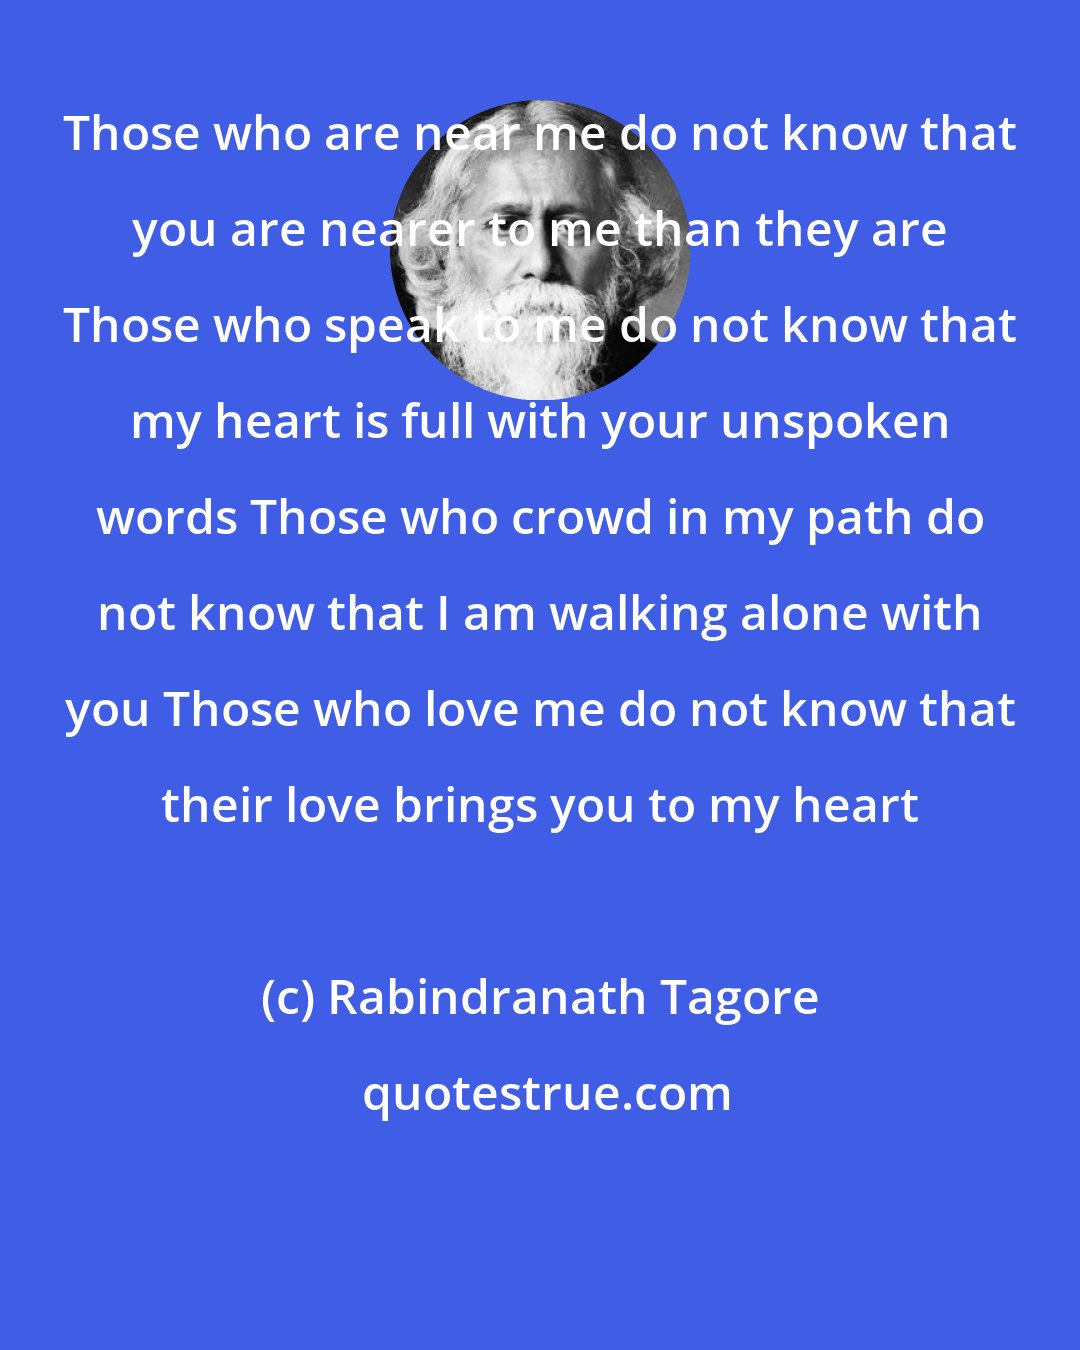 Rabindranath Tagore: Those who are near me do not know that you are nearer to me than they are Those who speak to me do not know that my heart is full with your unspoken words Those who crowd in my path do not know that I am walking alone with you Those who love me do not know that their love brings you to my heart